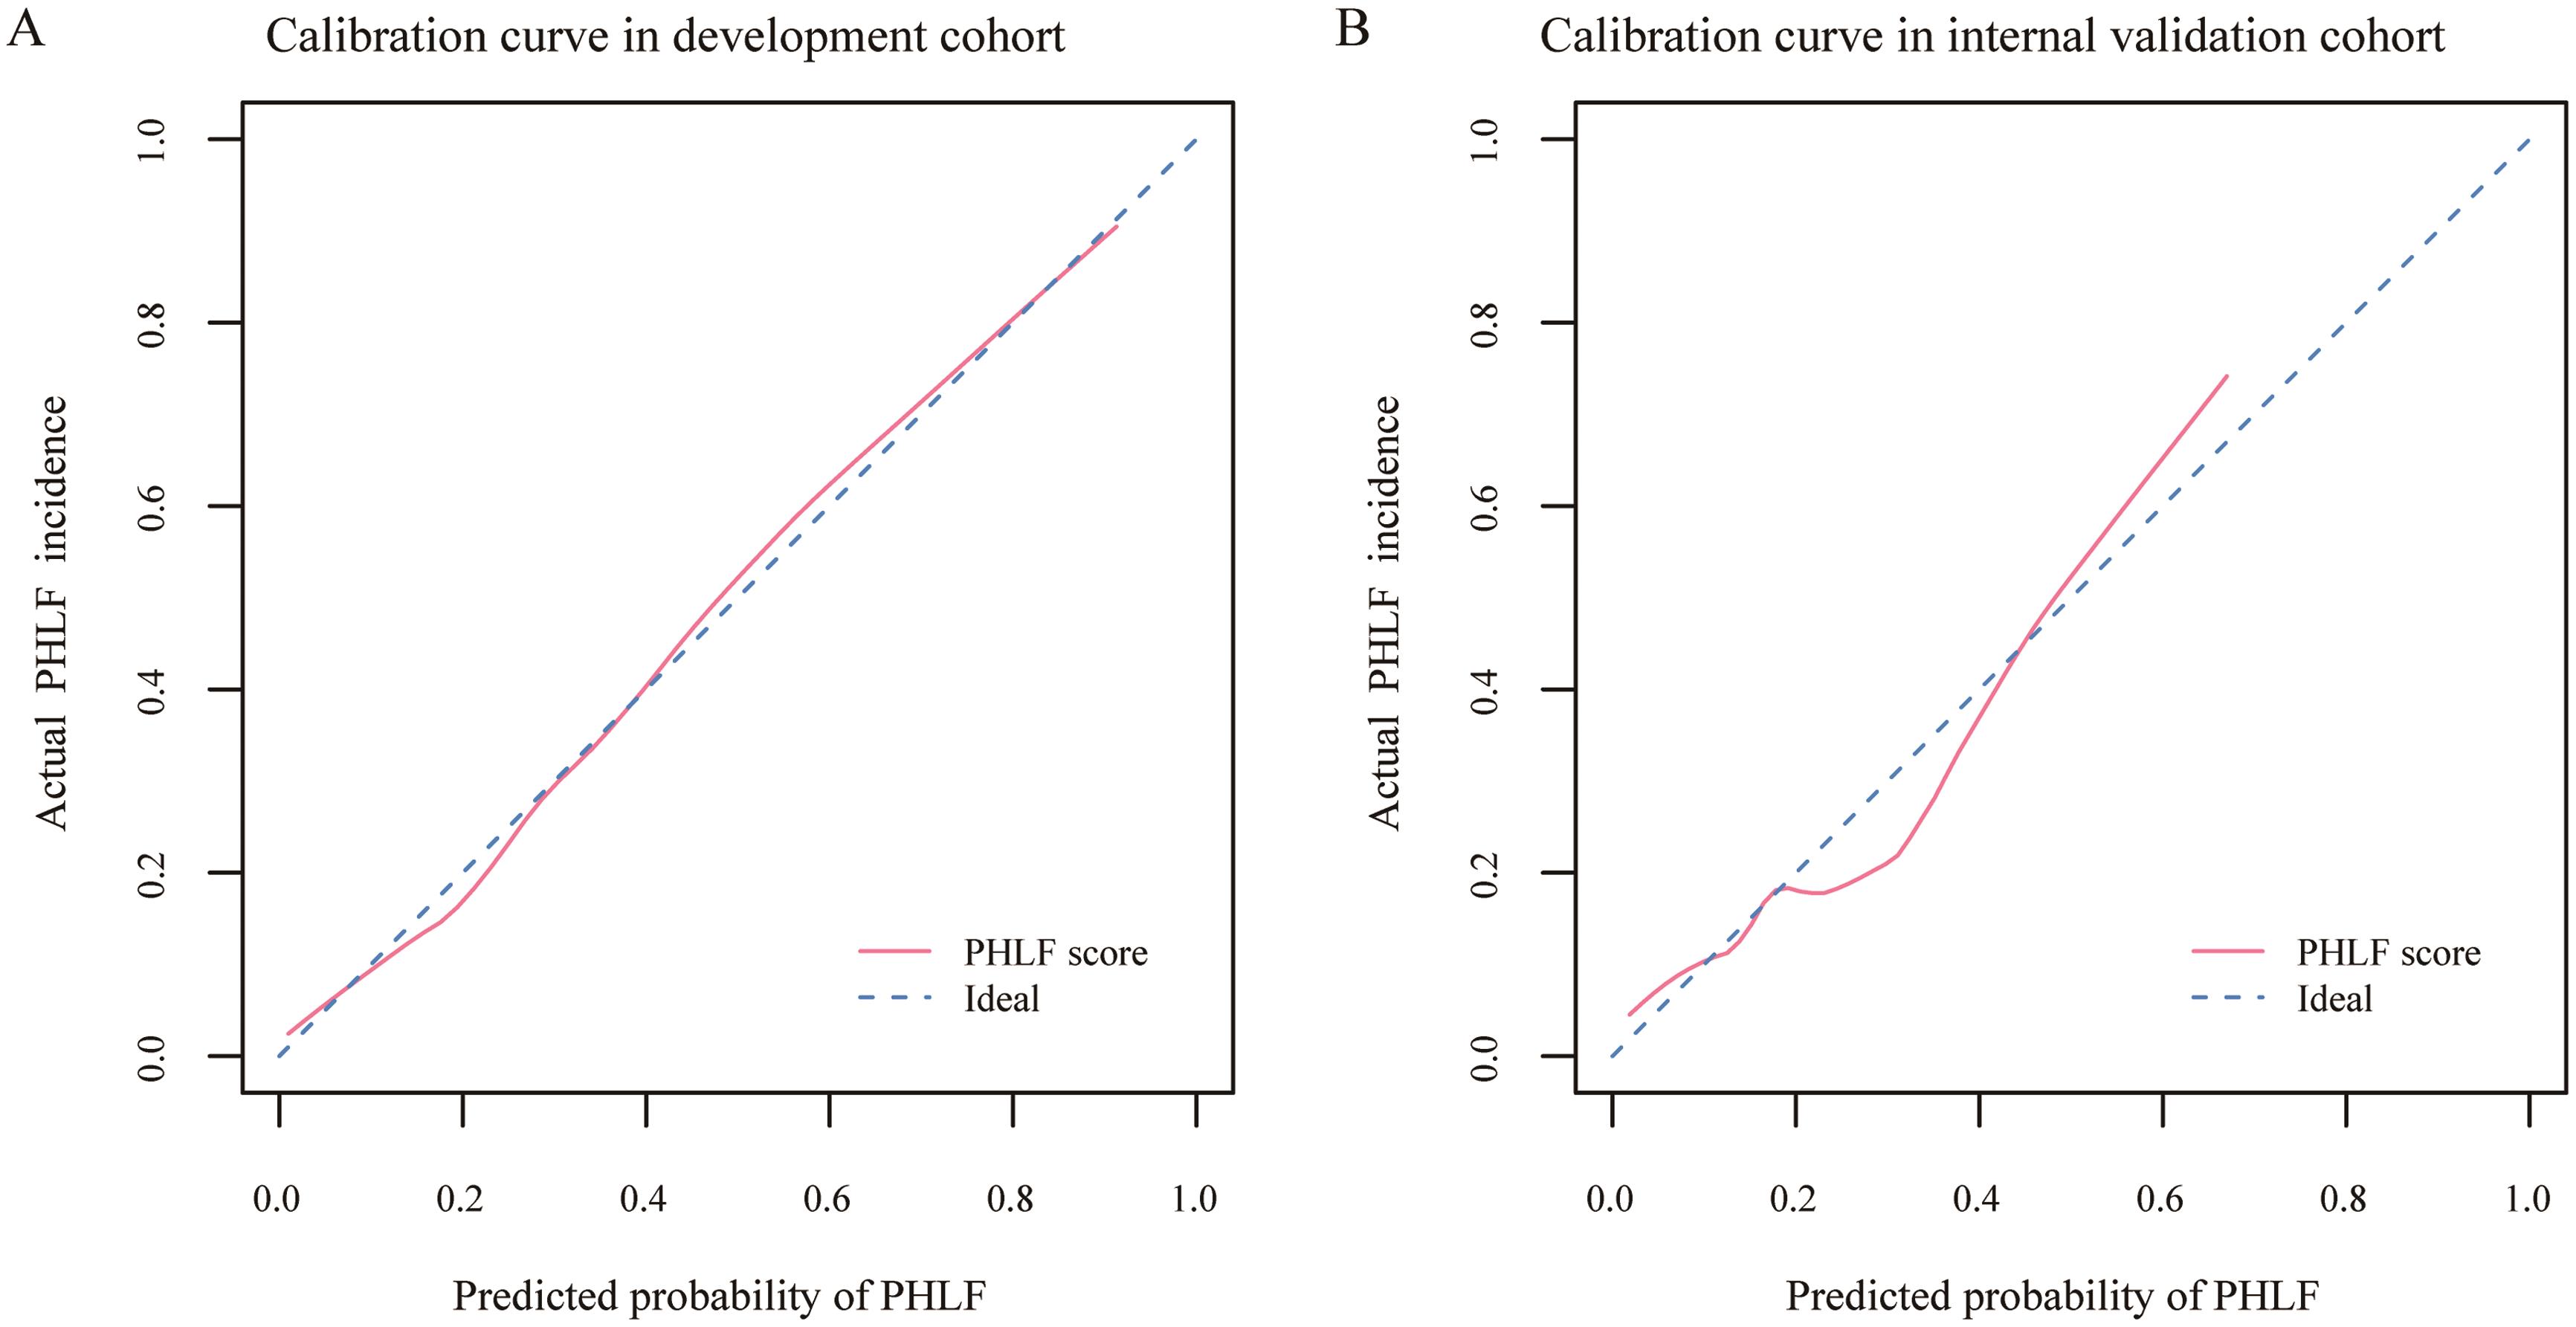 Calibration curves for the prediction of PHLF.